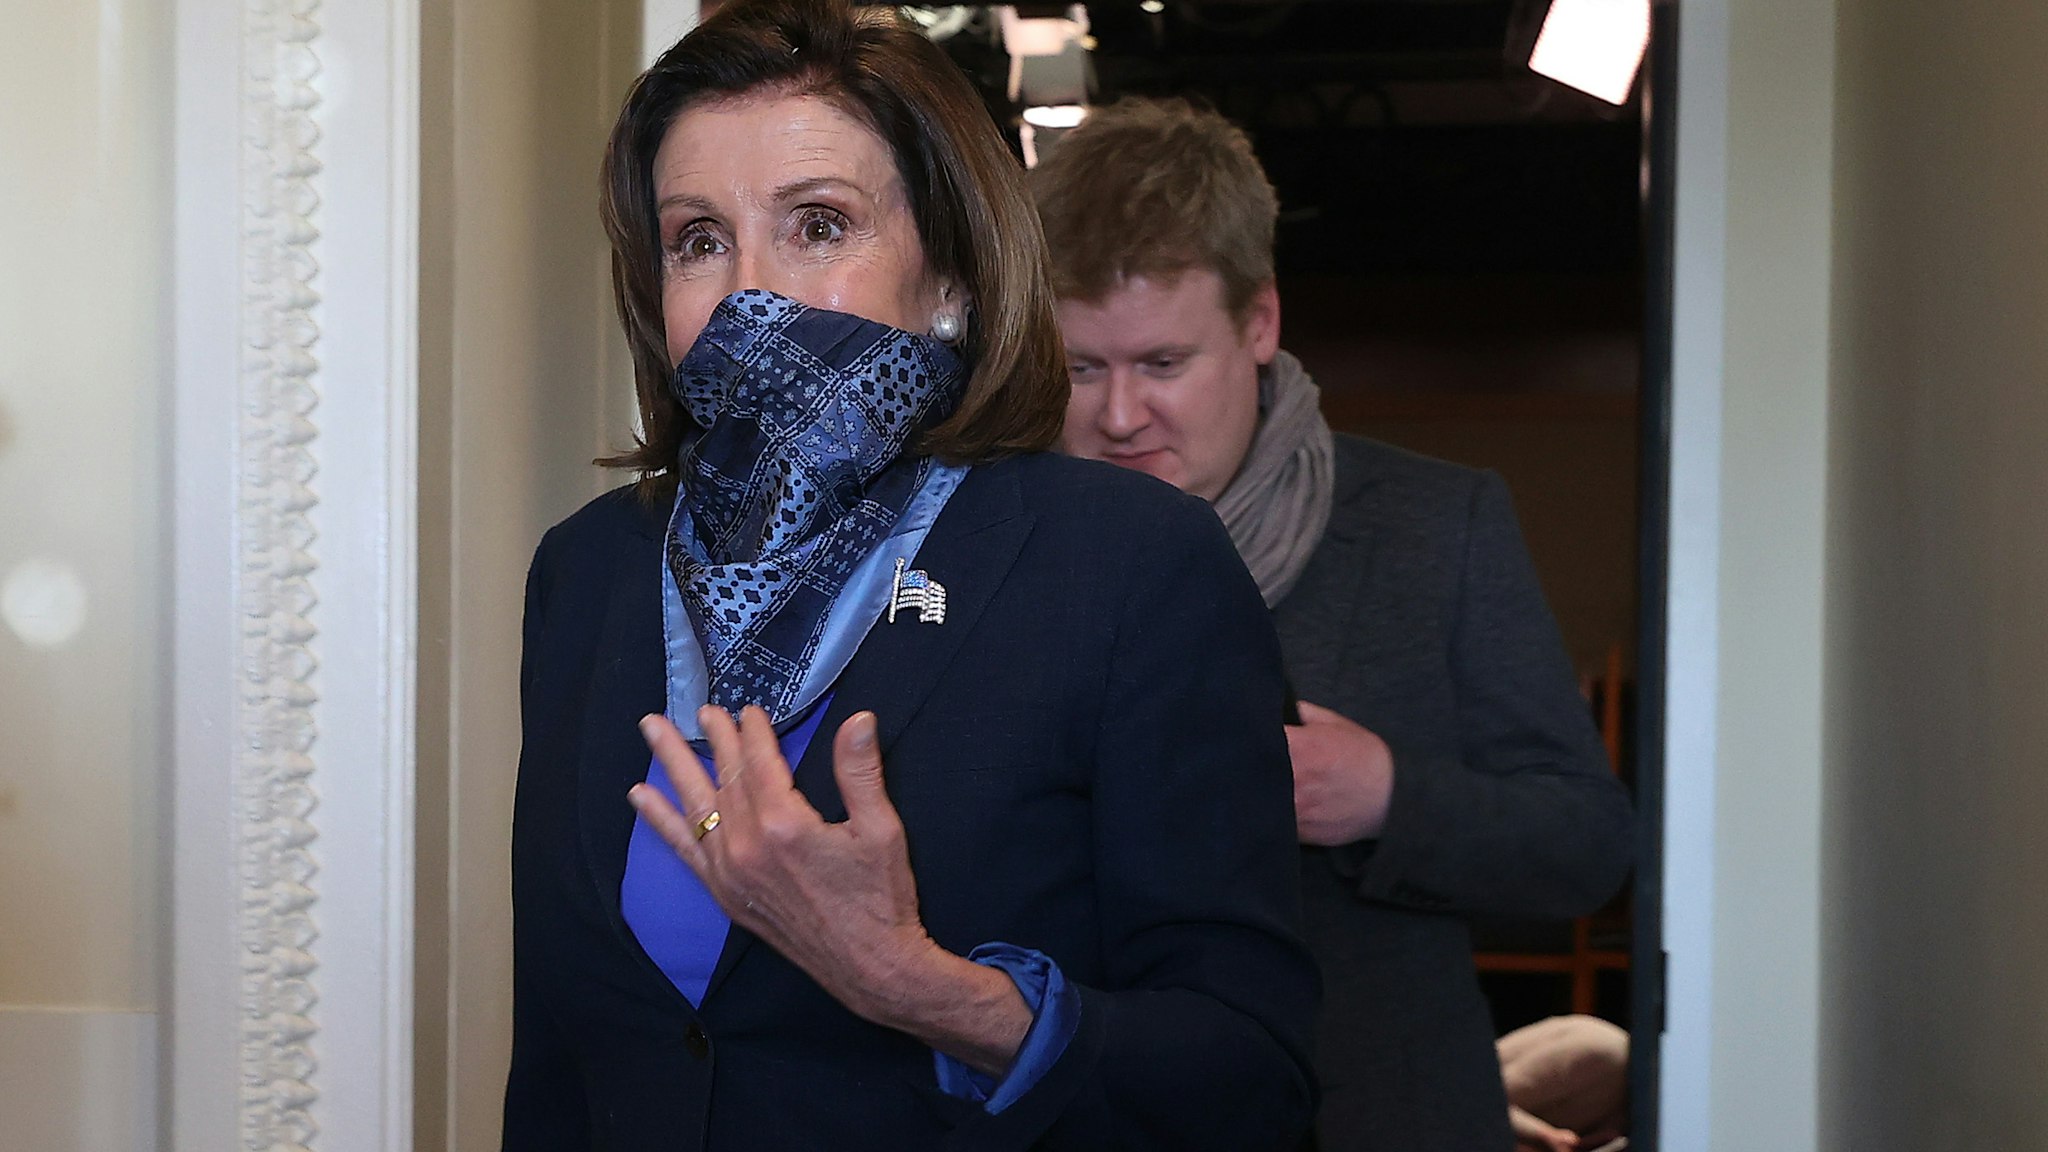 WASHINGTON, DC - APRIL 21: House Speaker Nancy Pelosi (D-CA) wears a scarf over her mouth and nose to guard against the coronavirus as she and and her Deputy Chief of Staff Drew Hammill leave a news conference with Minority Leader Charles Schumer (D-NY) at the U.S. Capitol April 21, 2020 in Washington, DC. Pelosi, Schumer and Senate Majority Leader Mitch McConnell (R-KY) agreed on new $500 billion bipartisan deal to deliver more coronavirus relief to small businesses and hospitals. (Photo by Chip Somodevilla/Getty Images)